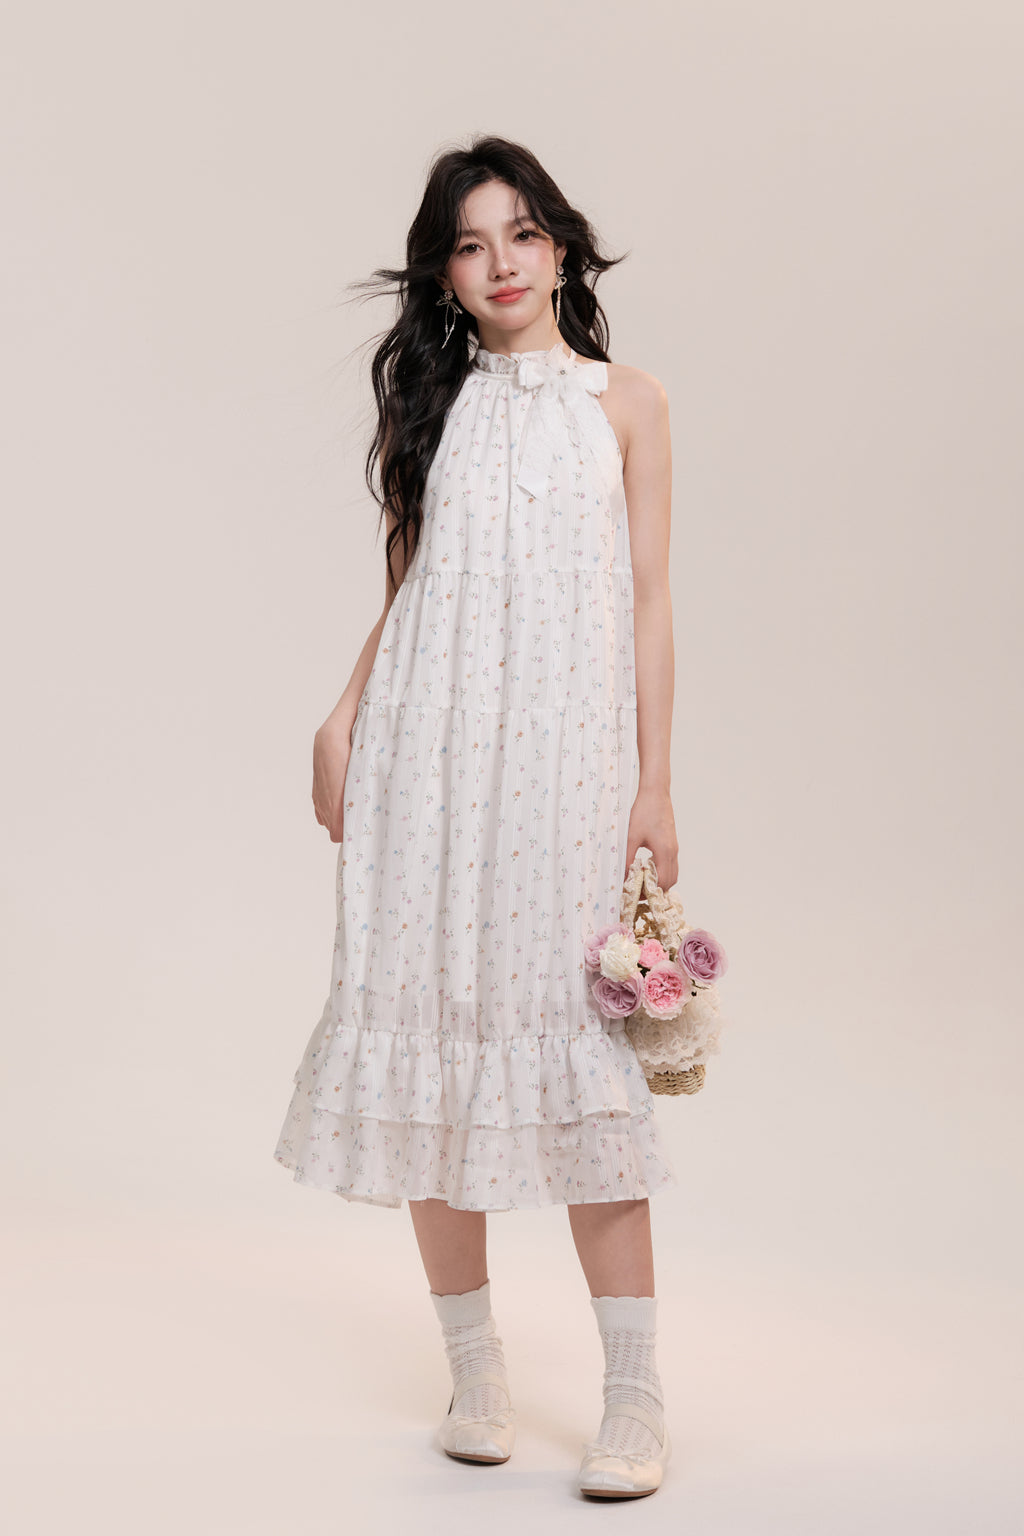 Moonlight Song Floral Bow Long Dress AOO0001